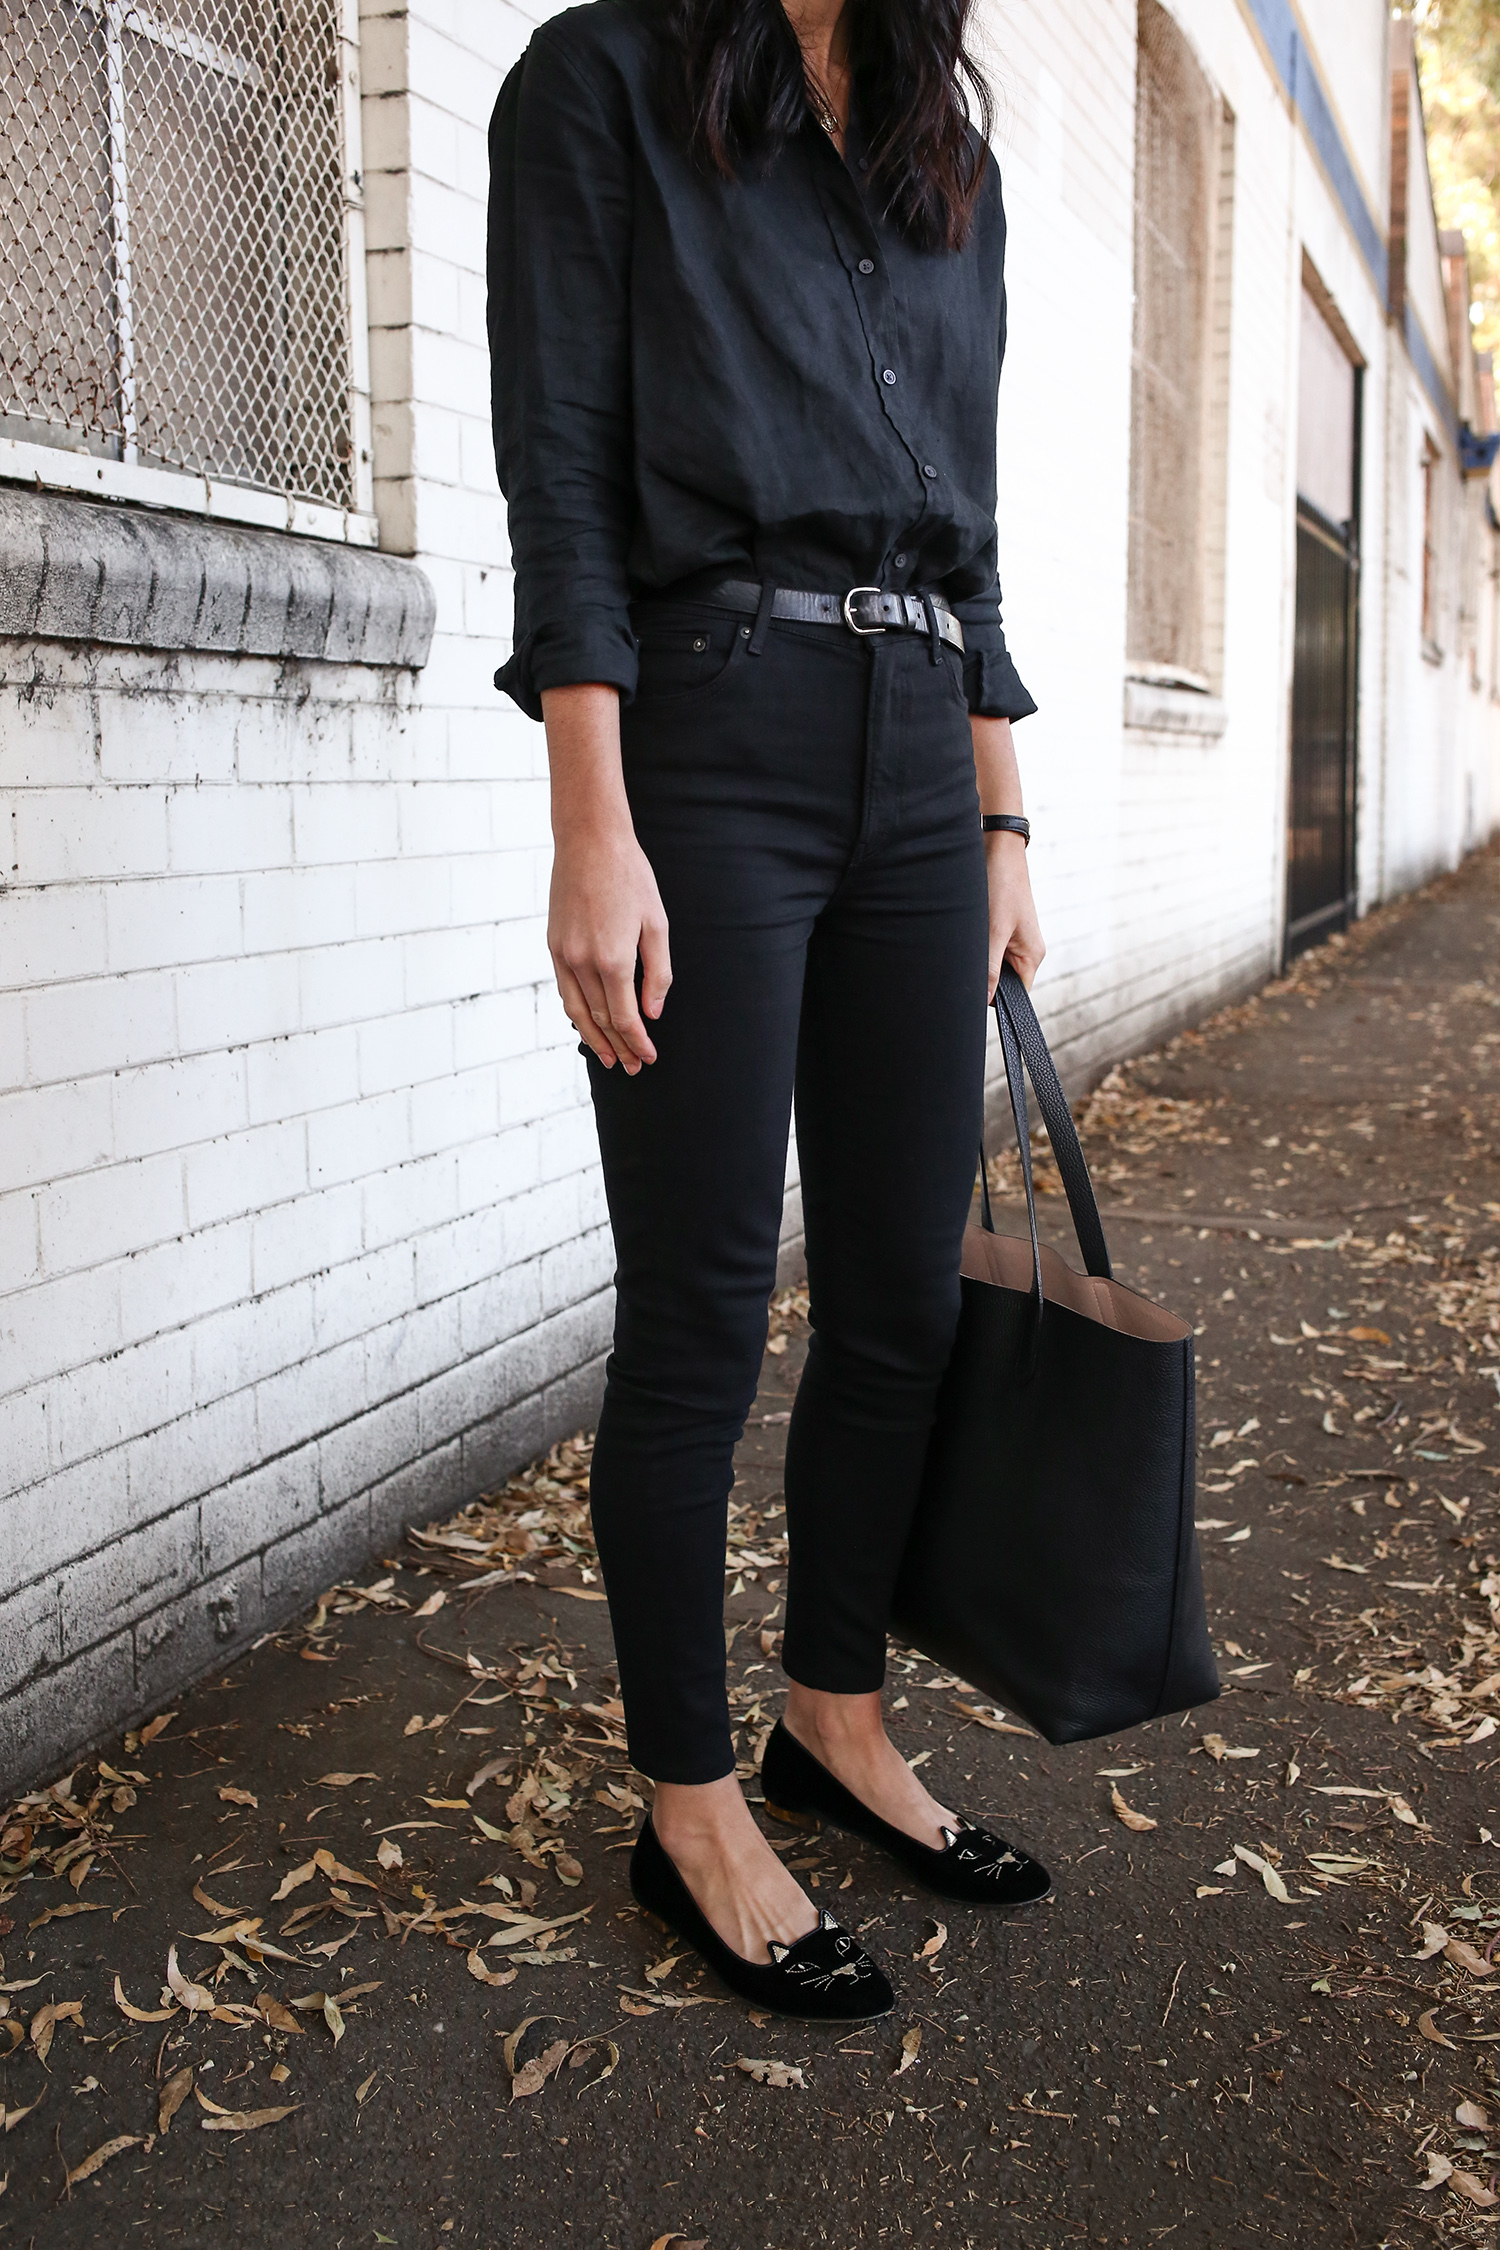 Outfit wearing Everlane linen shirt and Reformation skinny jeans